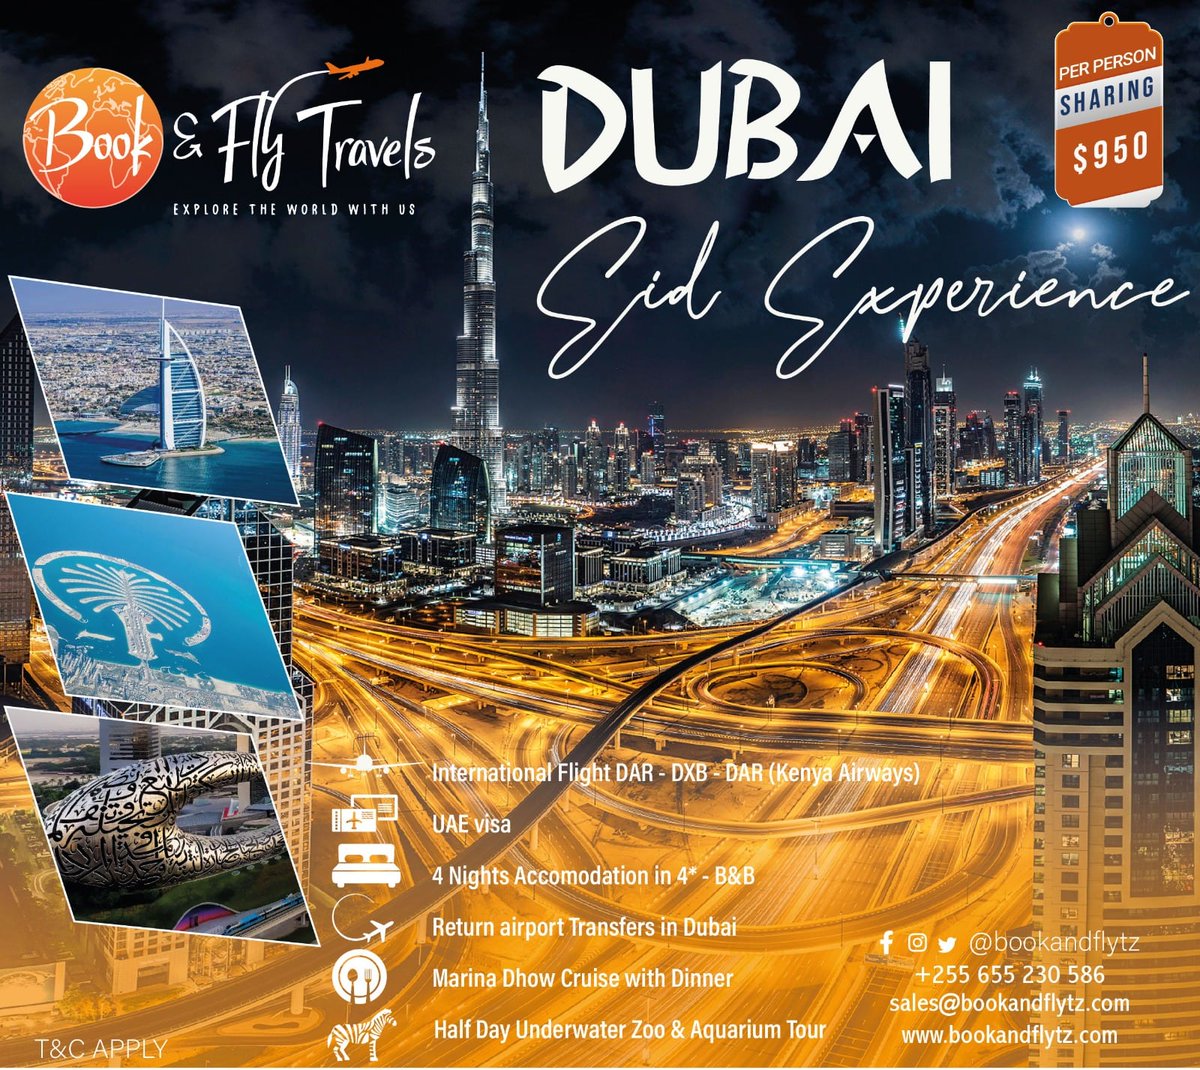 This Eid, have your best experience in DUBAI... Why not!?

Book now:+255(0) 655 230 586
Visit: bookandflytz.com
.
.
#Dubai #travel #travelwithus #travelaround #travelgo #travelagency #bookingagency #fly #flyaround #flywithus #flyagency #bookandfly